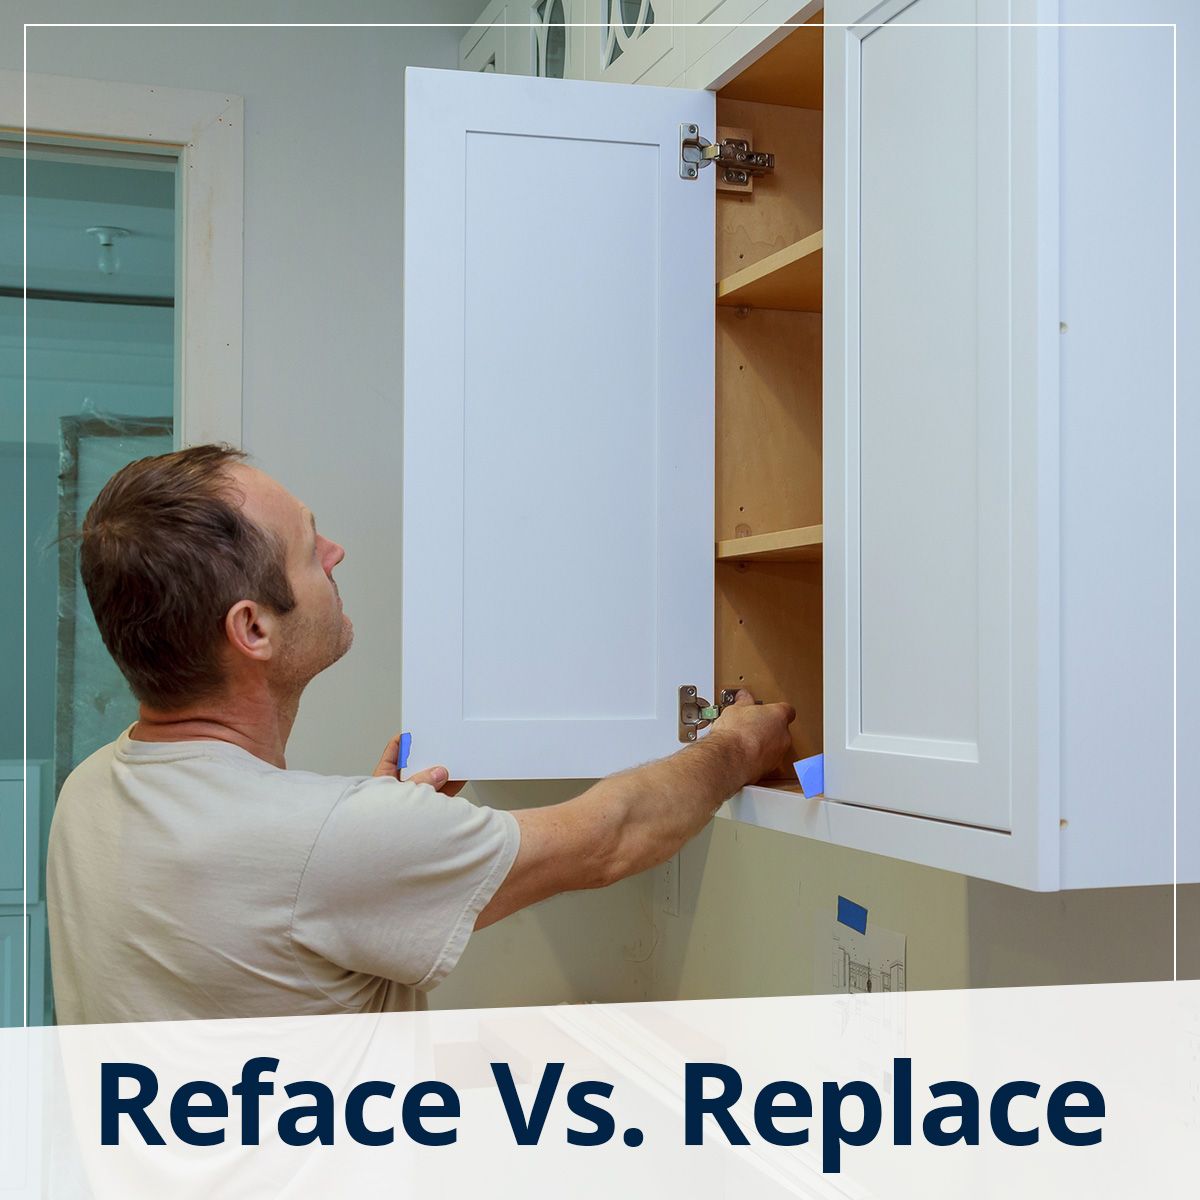 Reface Vs. Replace